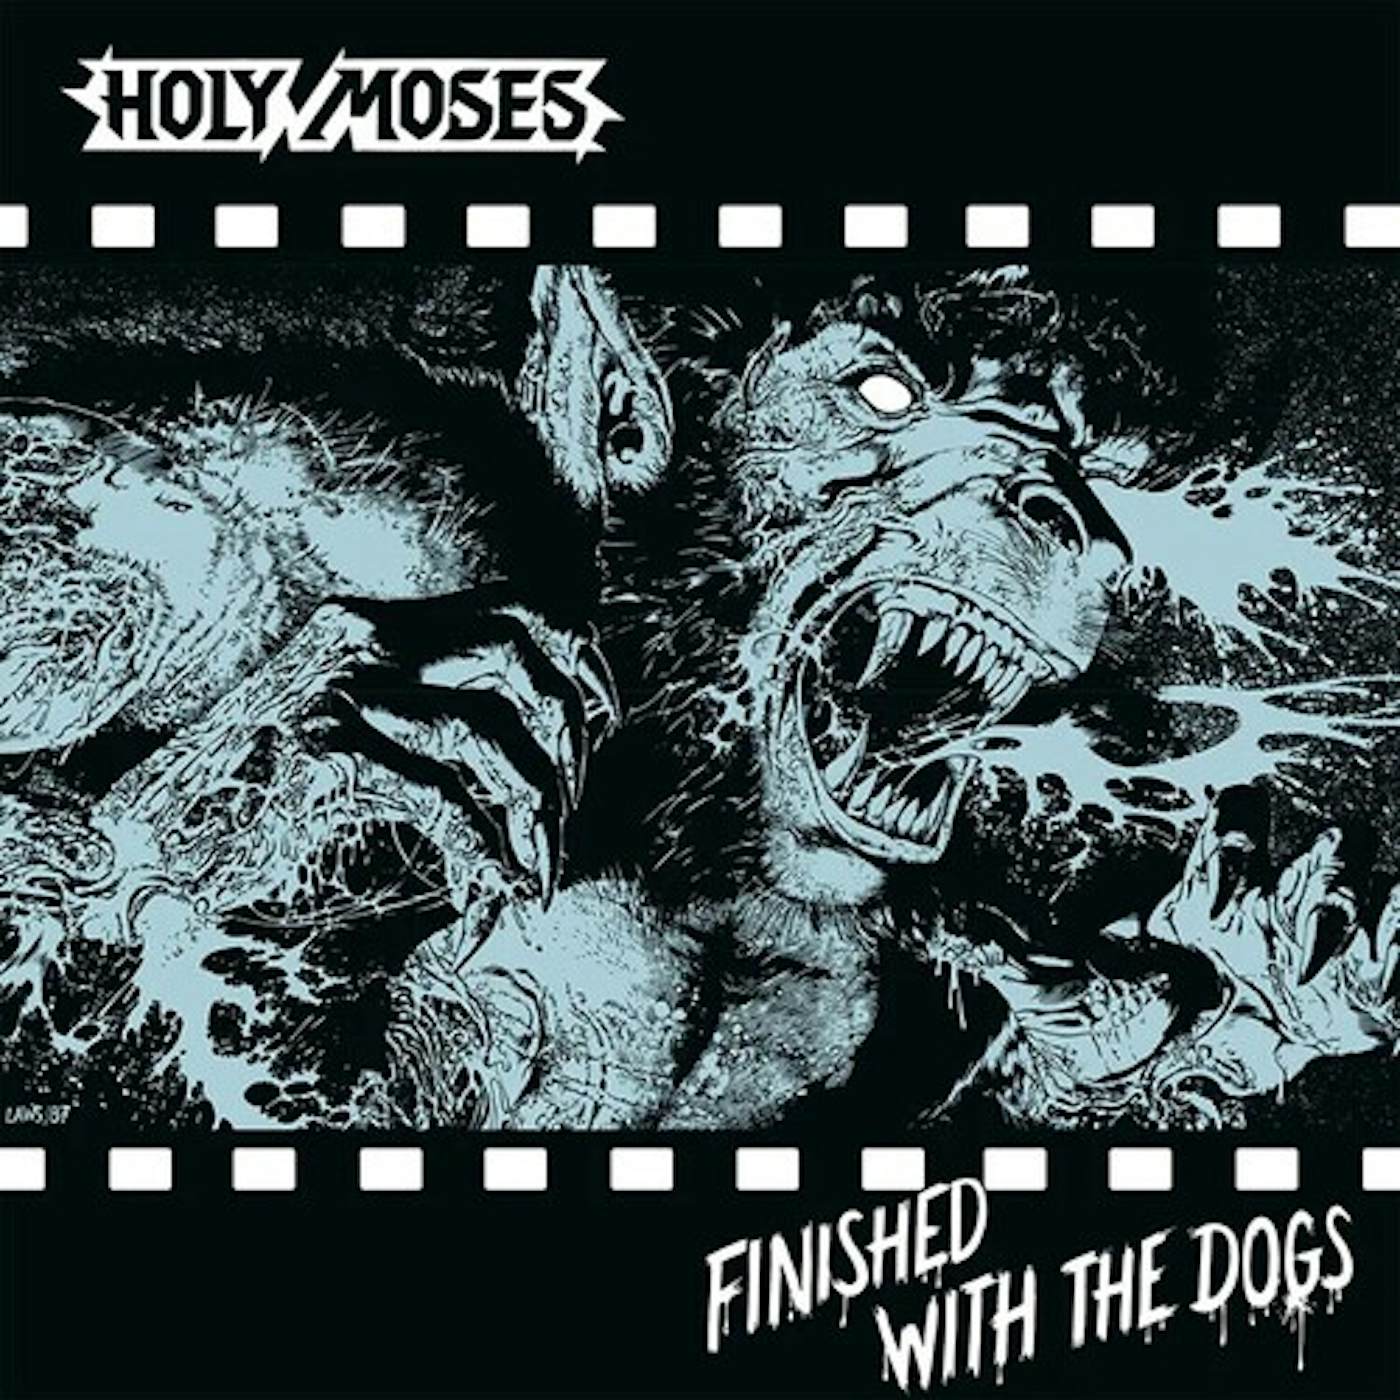 Holy Moses FINISHED WITH THE DOGS Vinyl Record